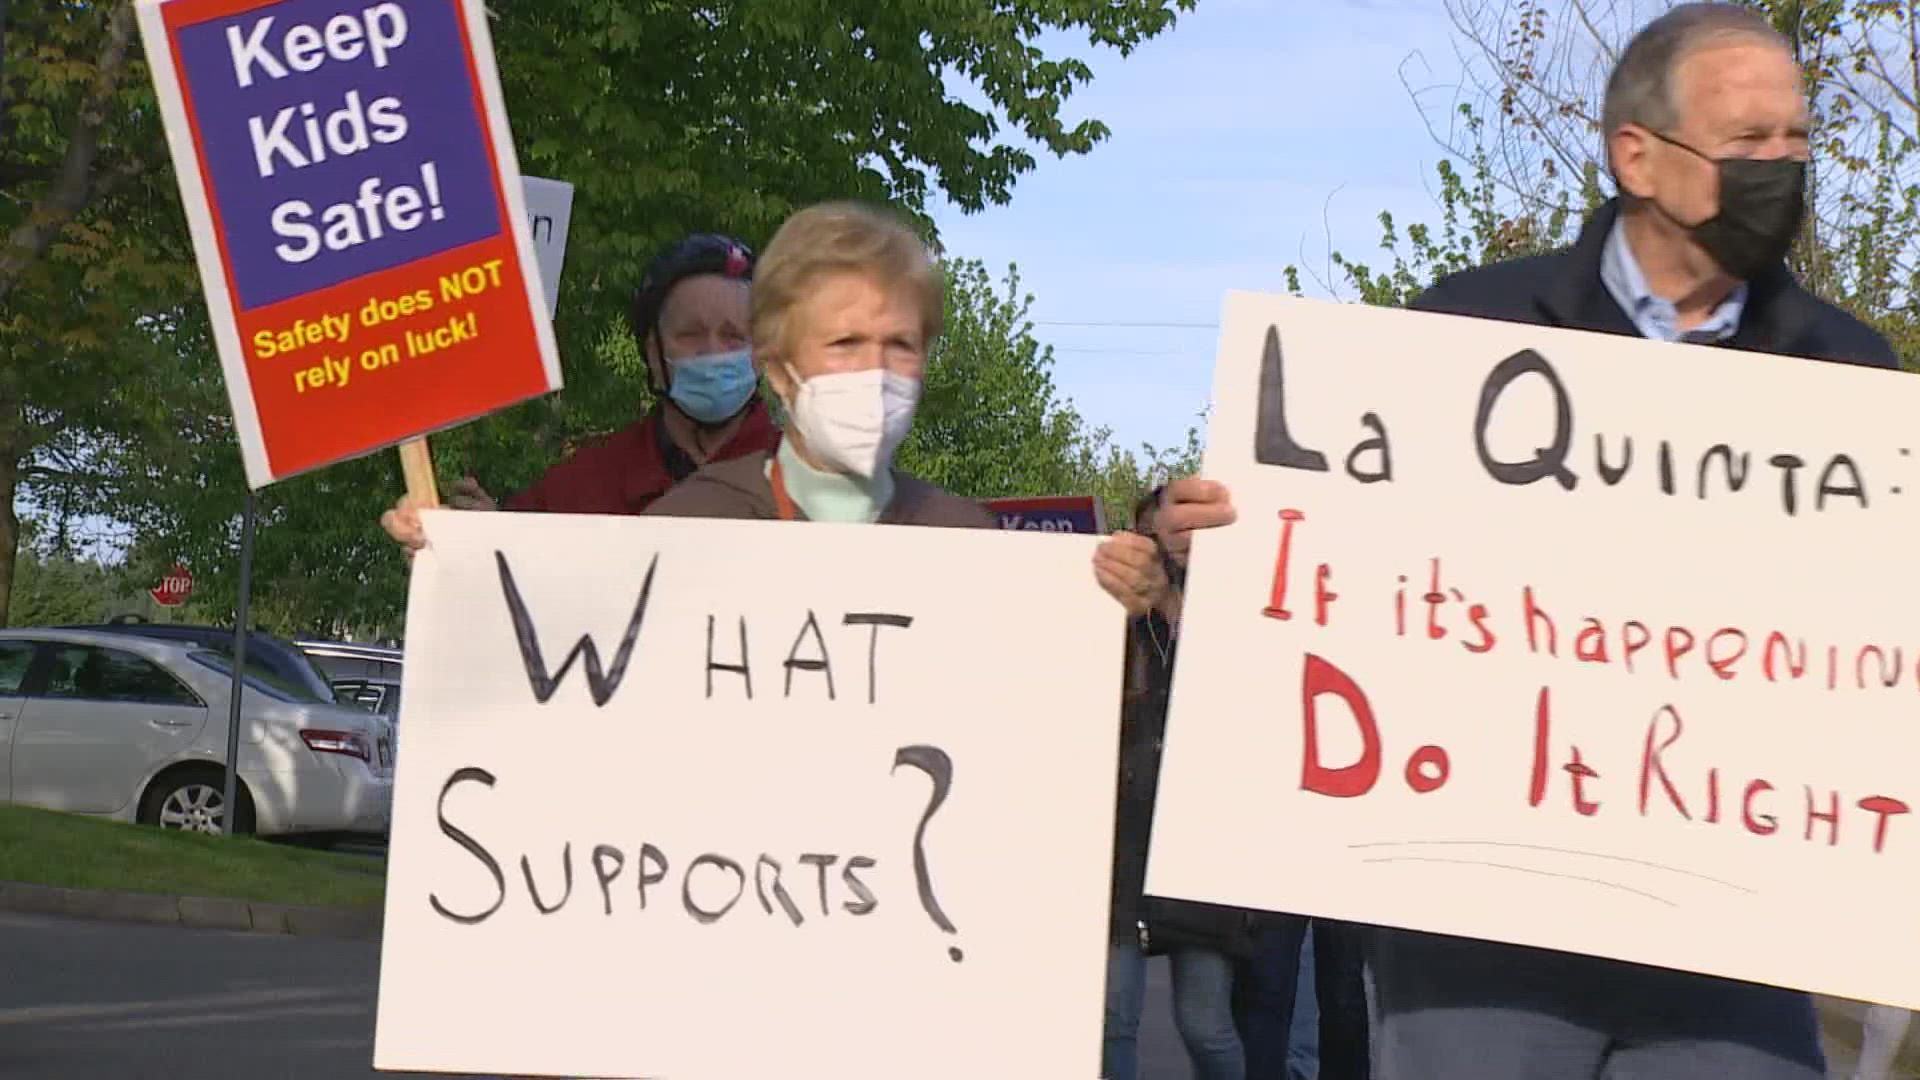 Some Kirkland residents are protesting a plan to turn a former La Quinta motel into housing for the homeless.